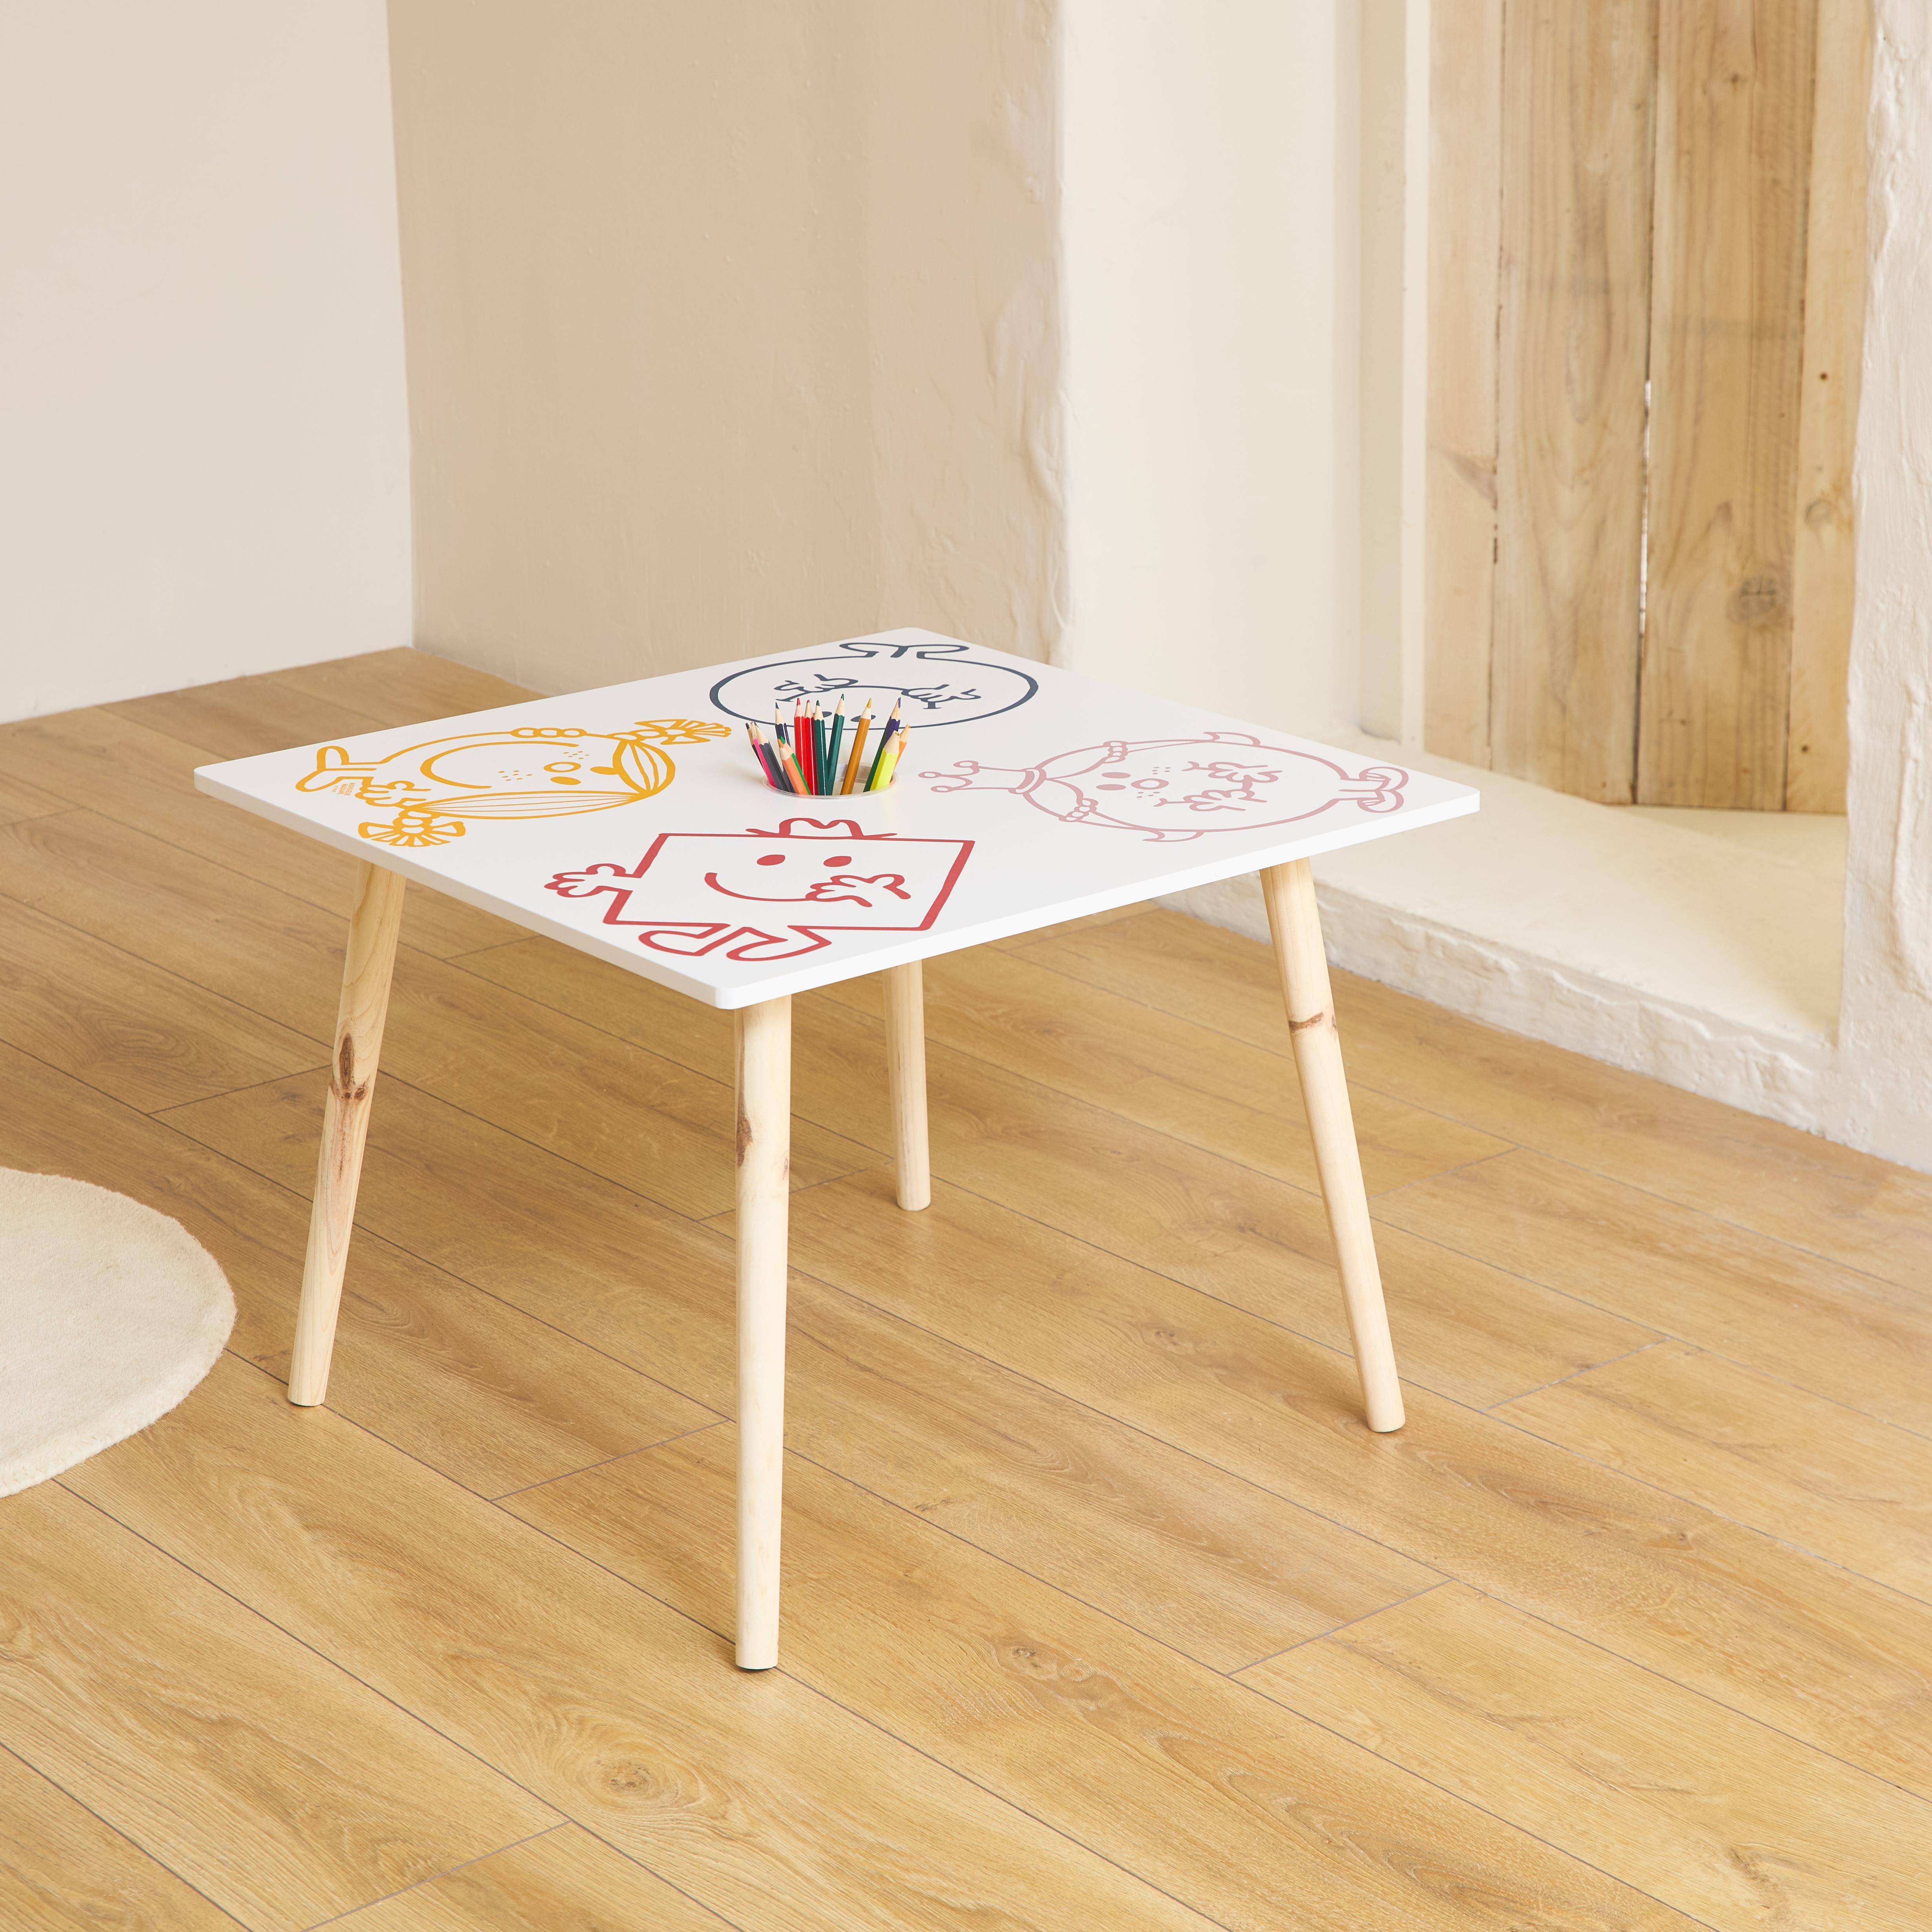 Table with pencil cup for children in the Mr. Men & Little Miss collection,sweeek,Photo2